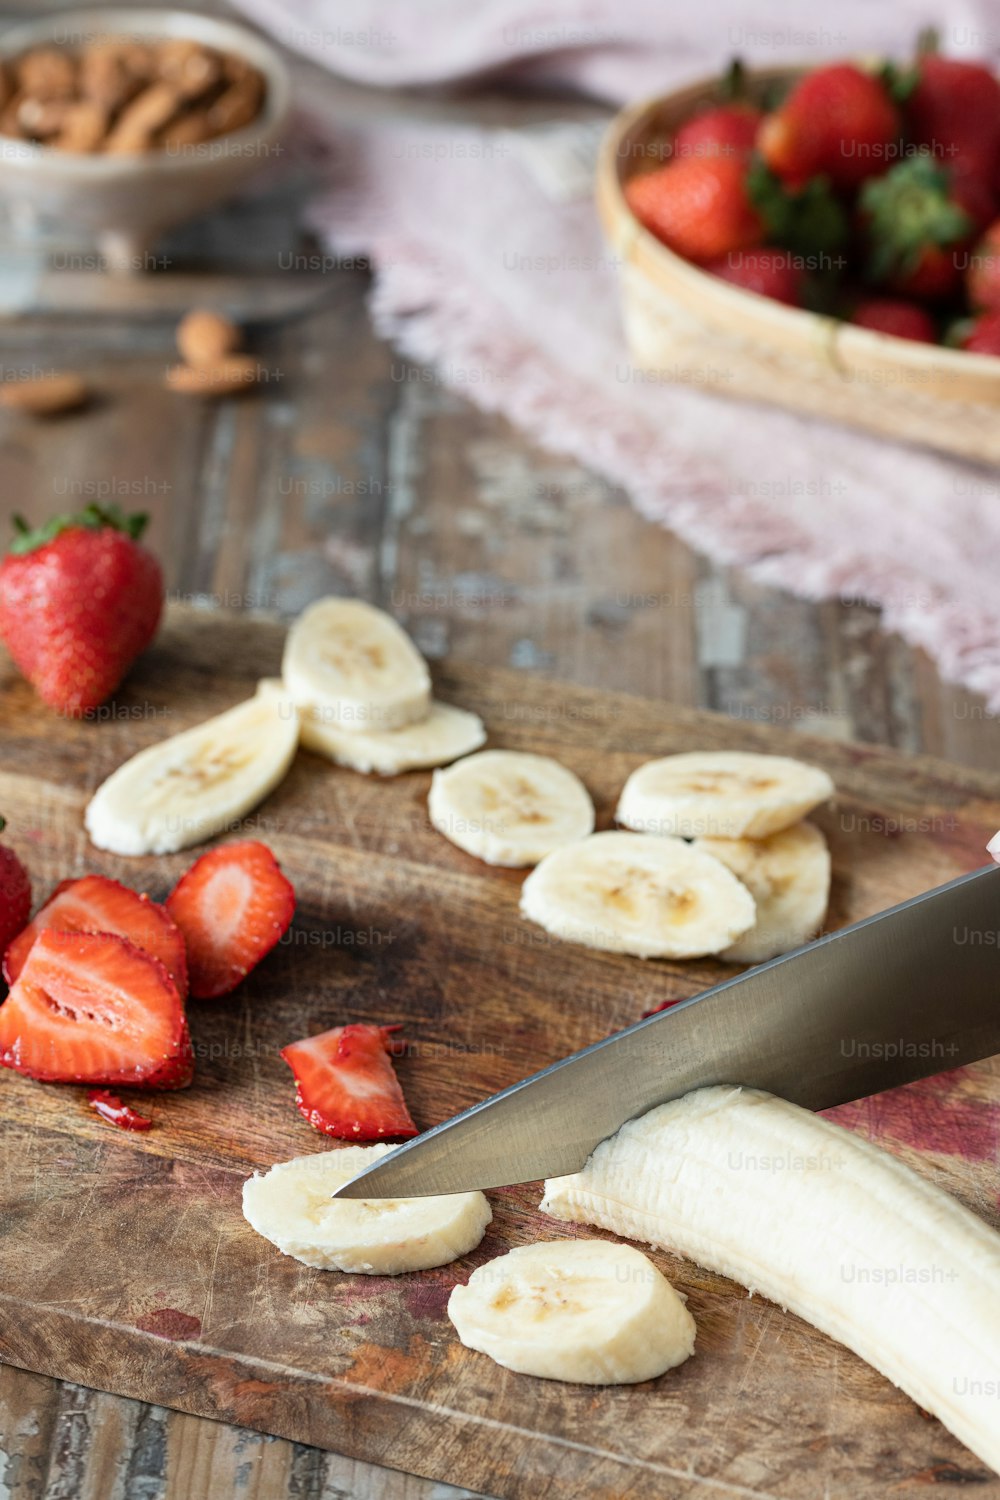 a cutting board topped with sliced bananas and strawberries